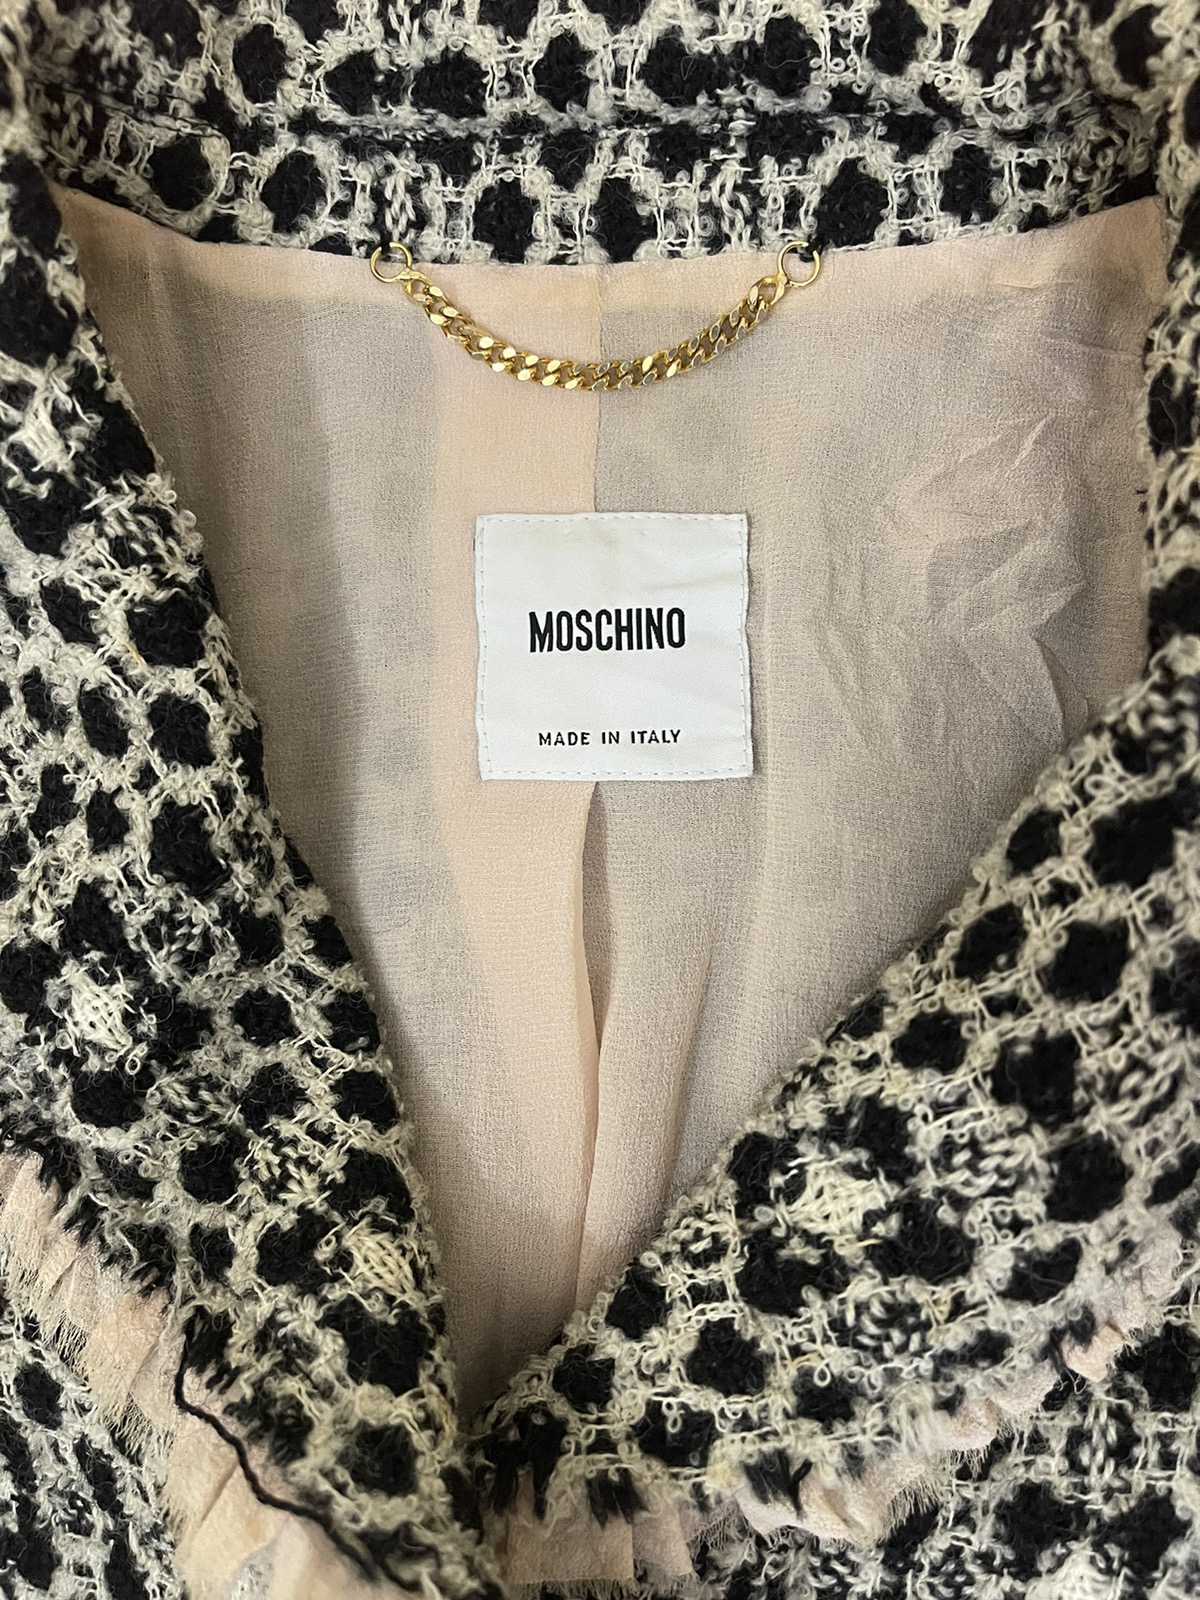 Moschino women jacket made in italy - 10